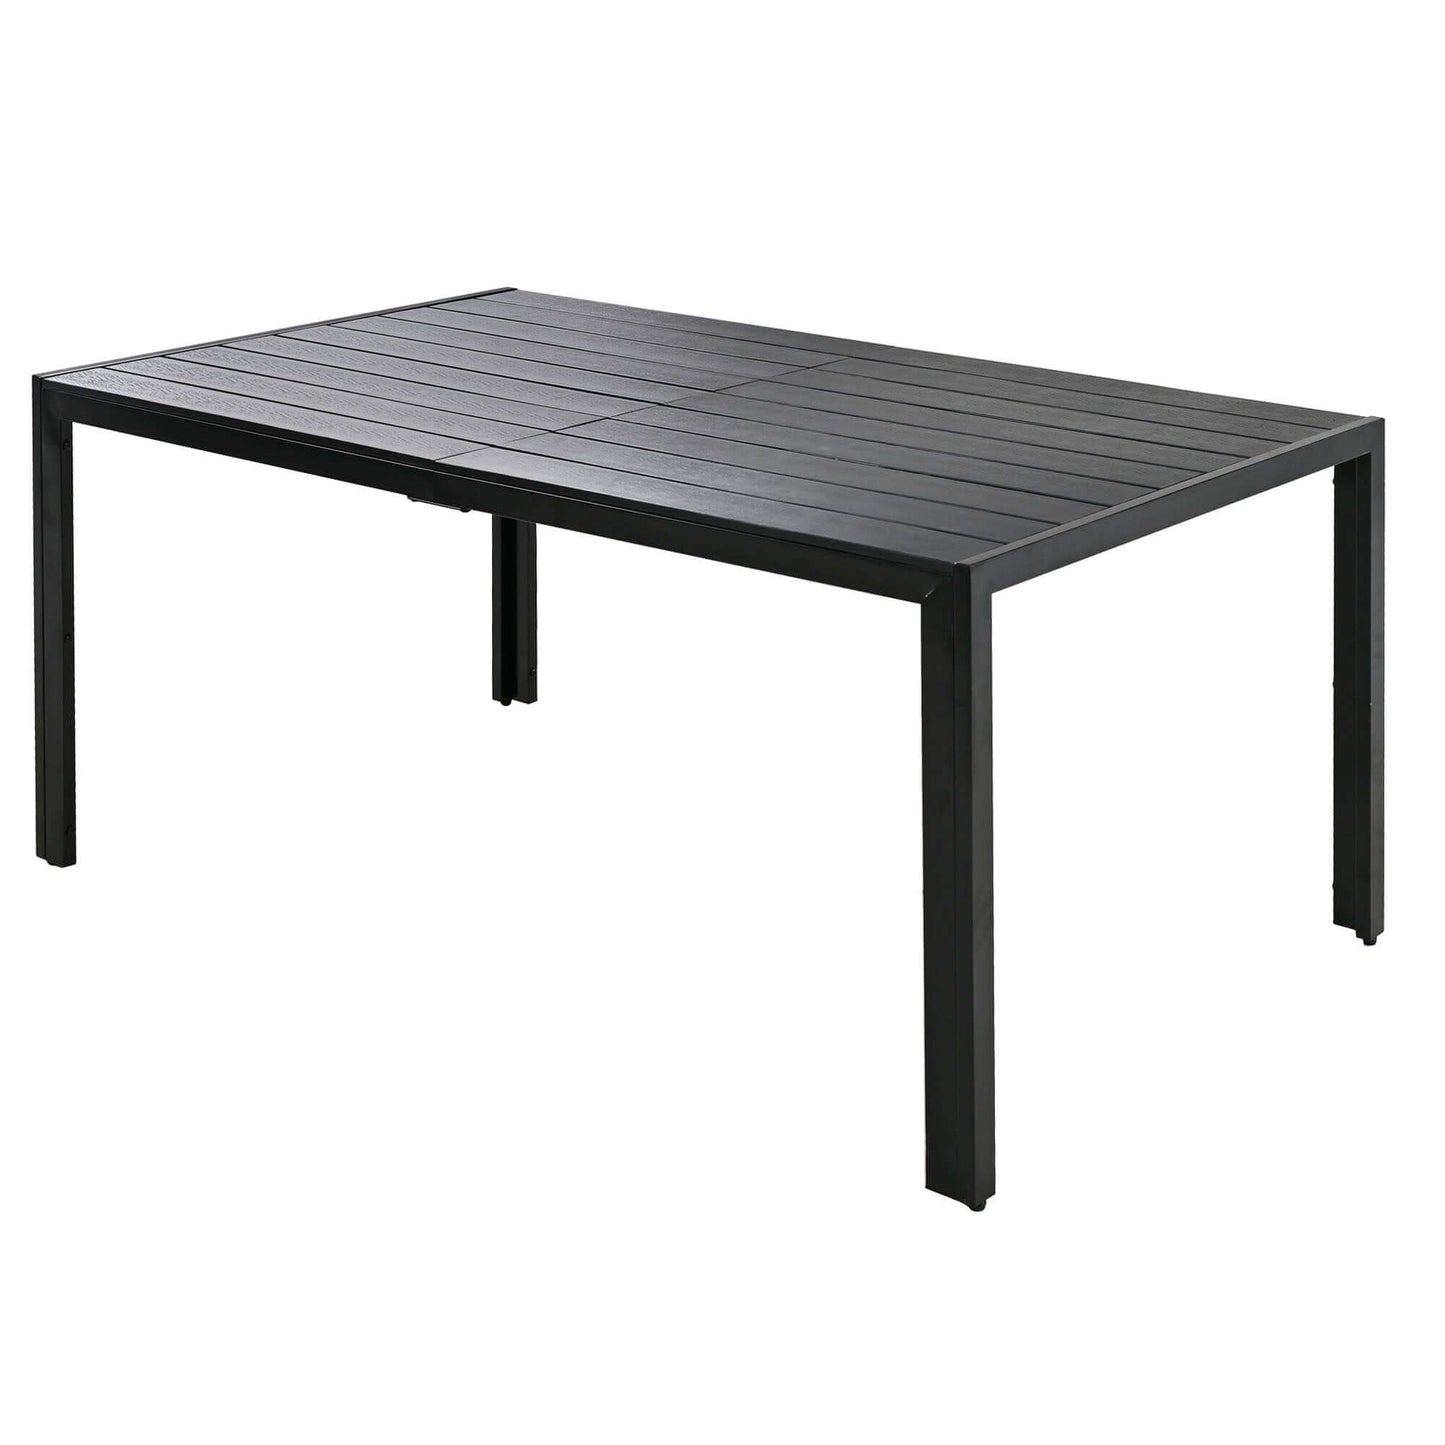 High-quality black steel outdoor table from U-Style, perfect for patio, balcony, and backyard use.